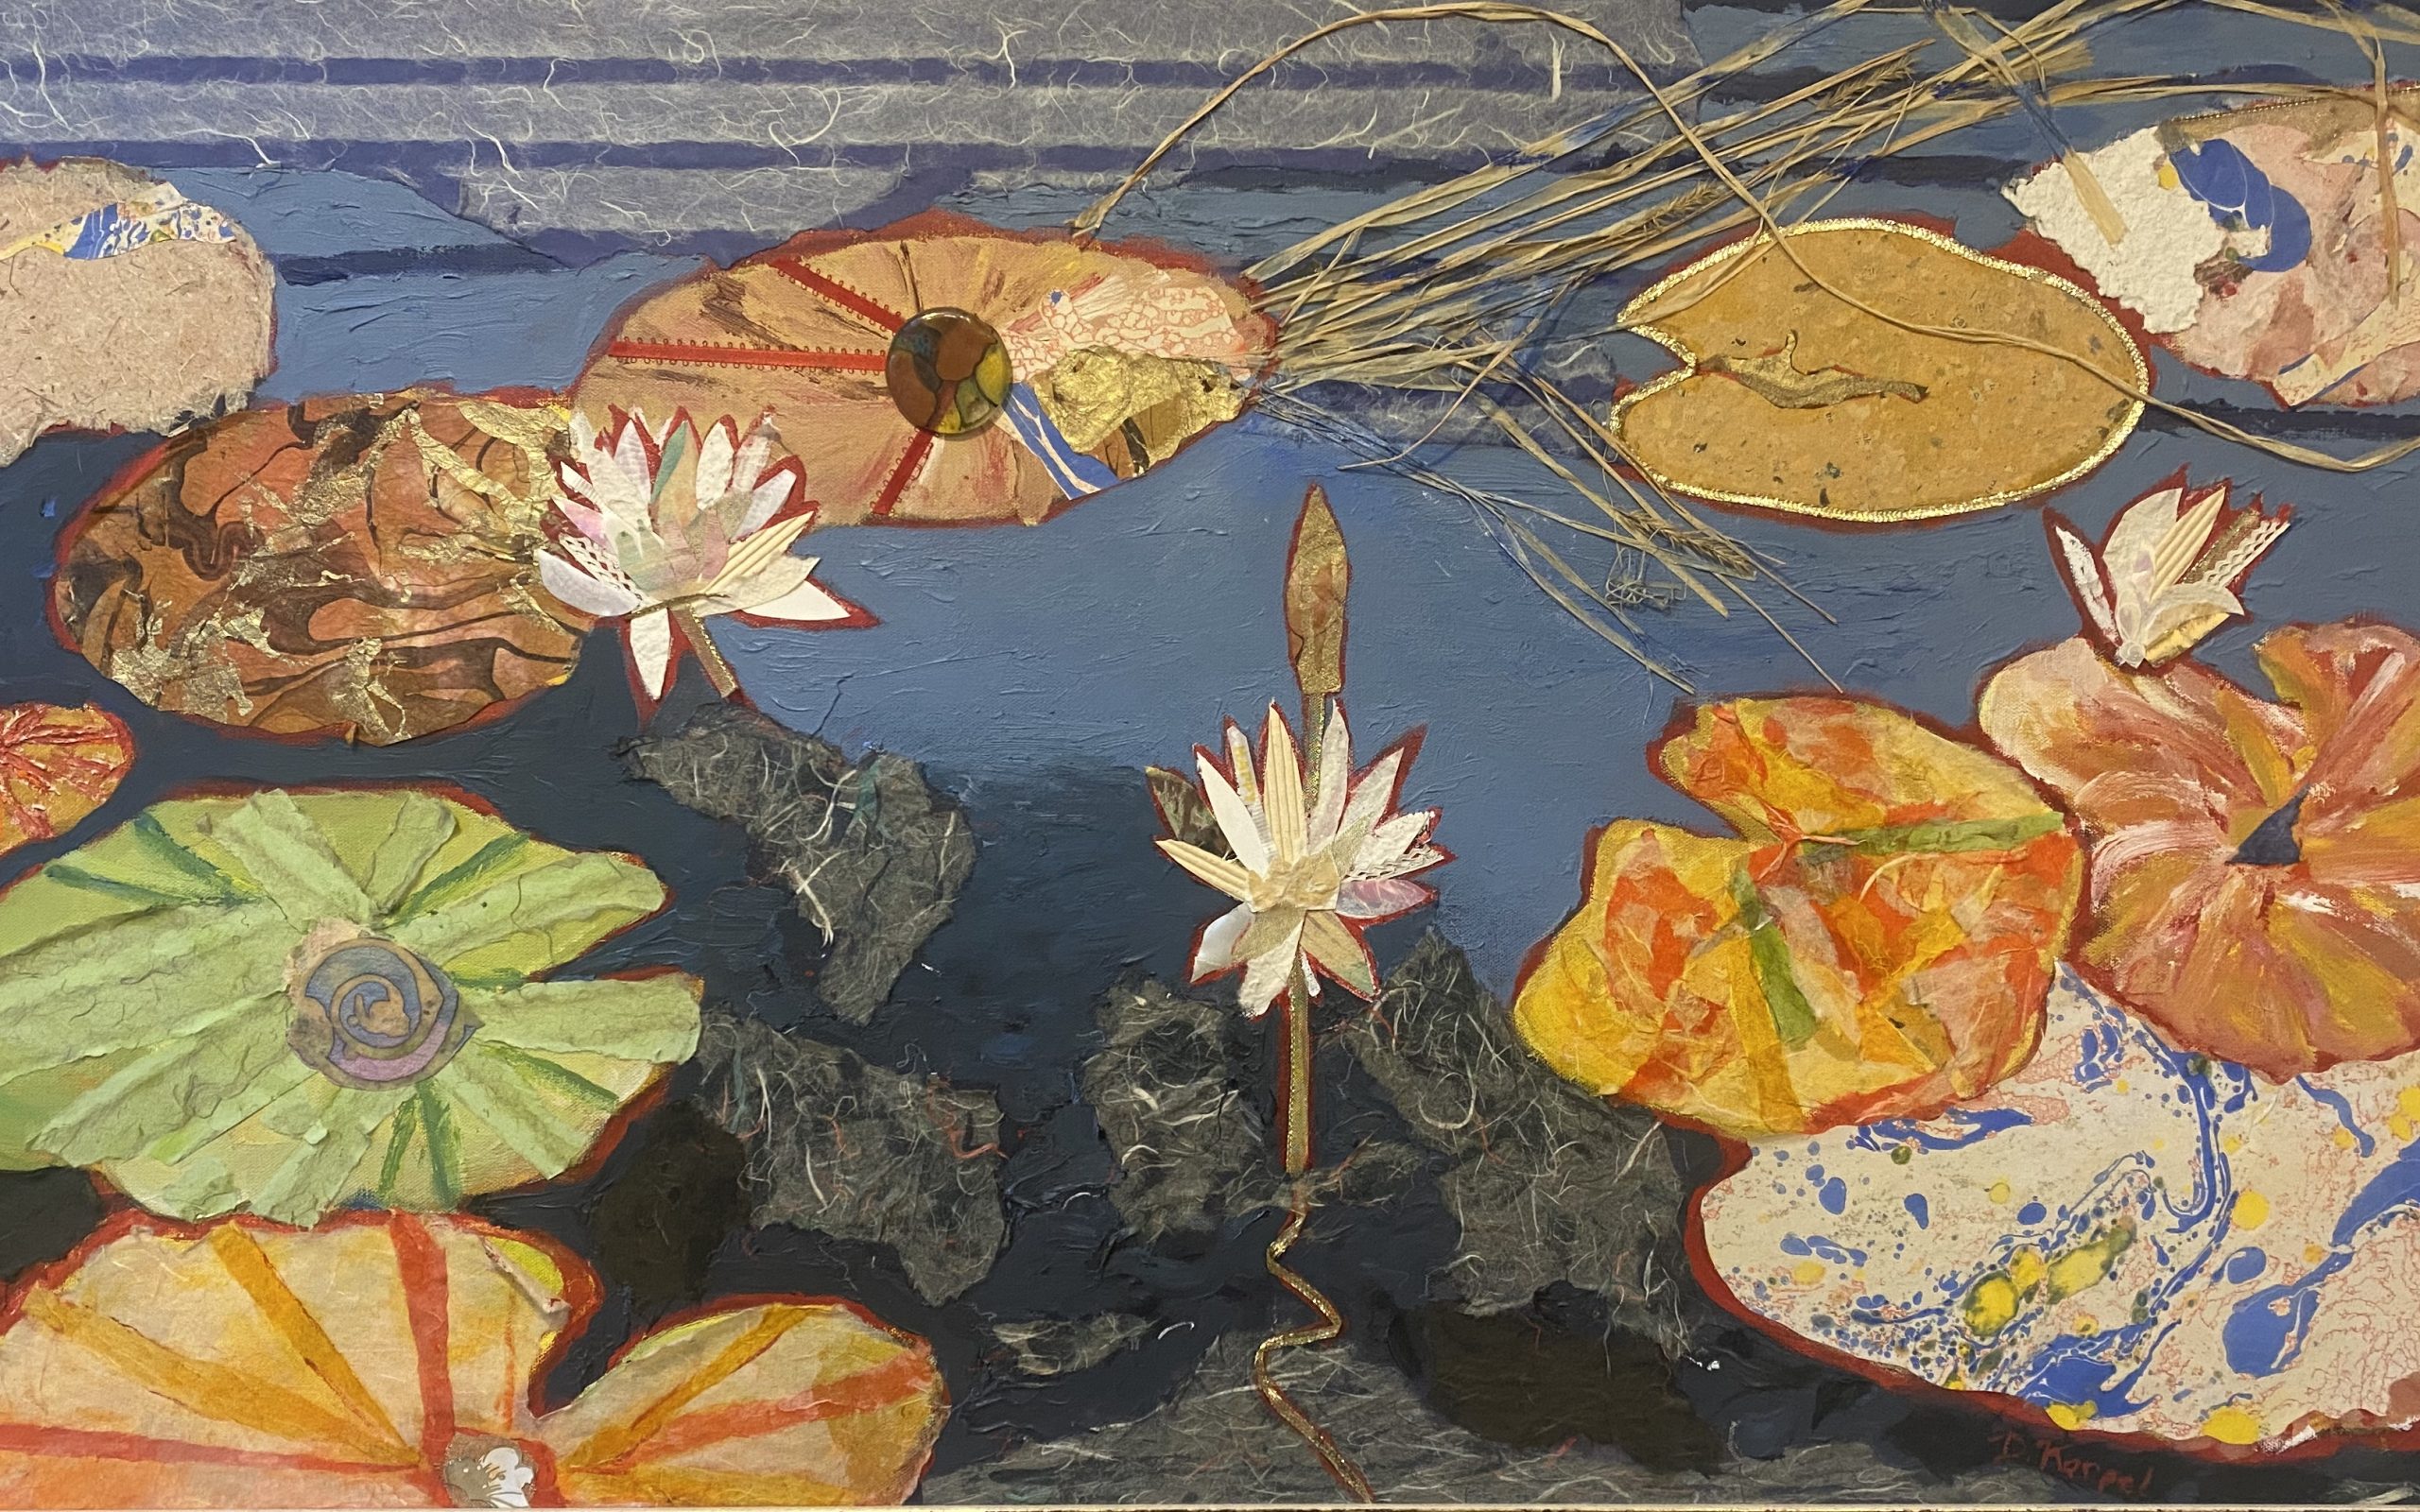 42 Diane Karpel "An Encounter with Water Lilies" 22x36 Oil Mixed media $900